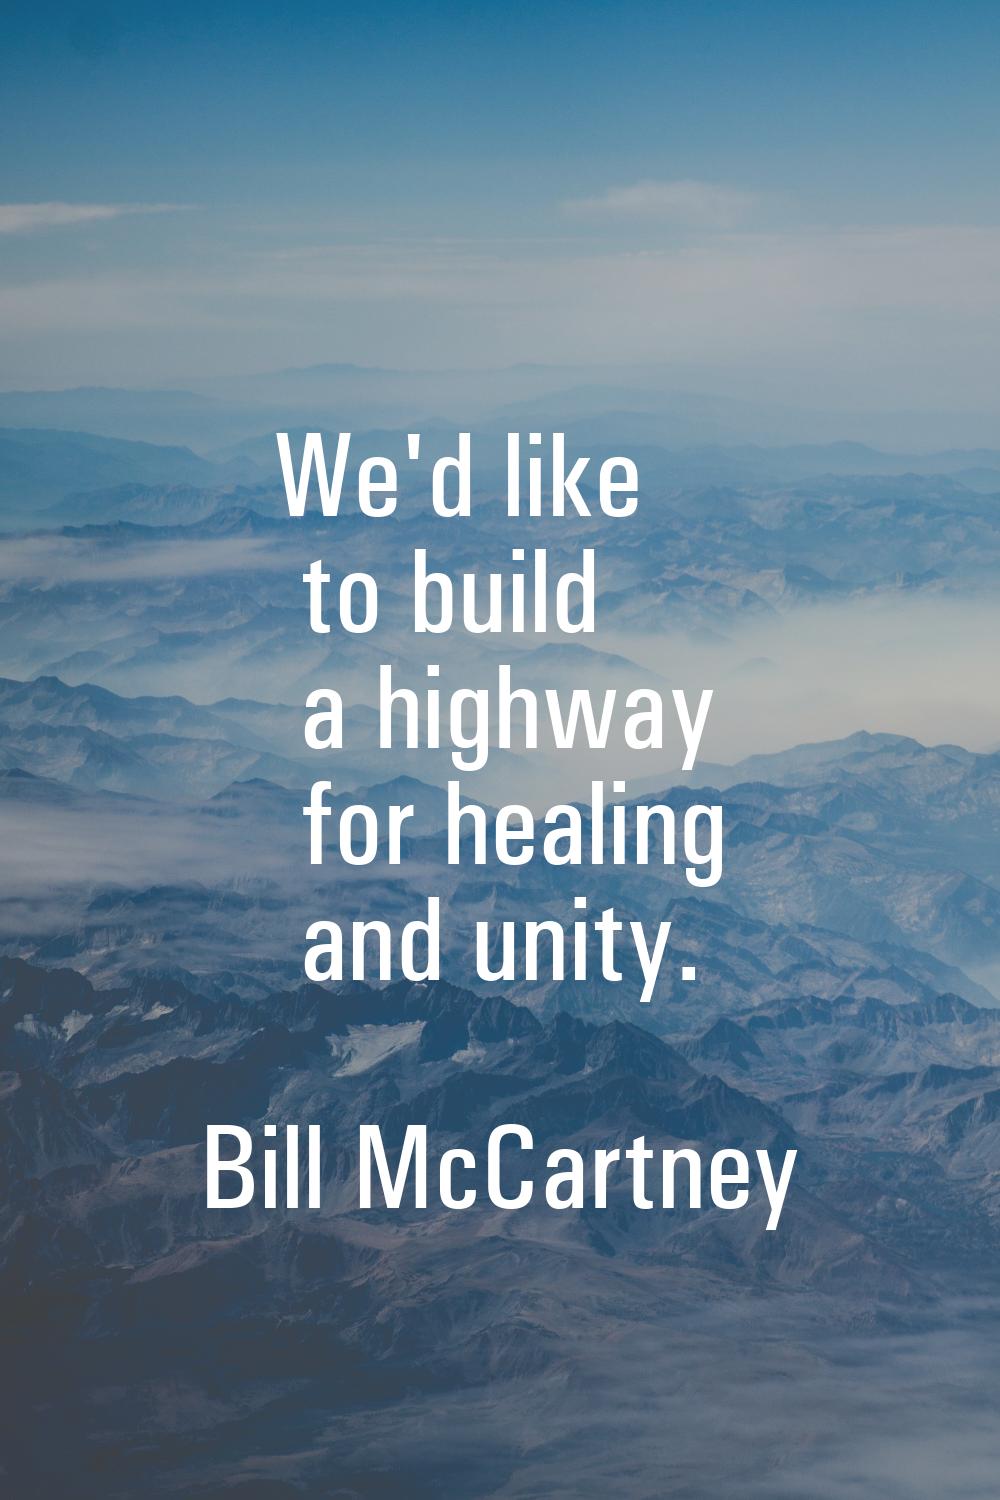 We'd like to build a highway for healing and unity.